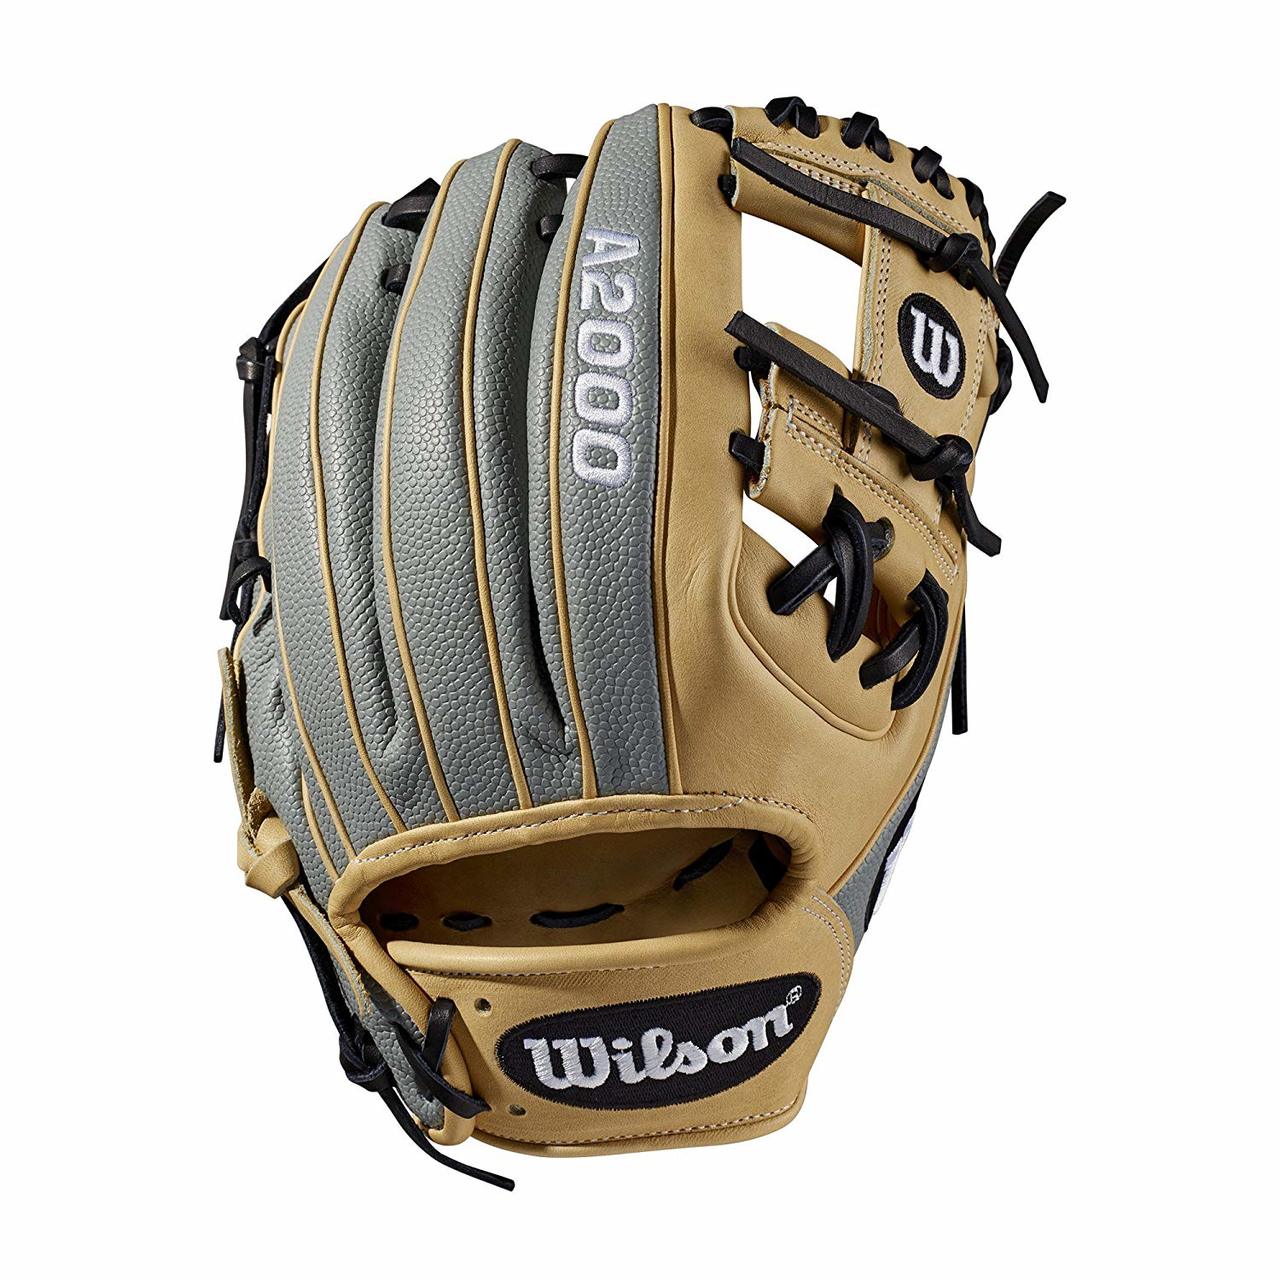 wilson-a2000-1788ss-baseball-glove-2019-right-hand-throw-11-25-superskn WTA20RB191788SS-RightHandThrow Wilson 887768701932 11.25 inch; infield model; H-Web Double lacing at the base of